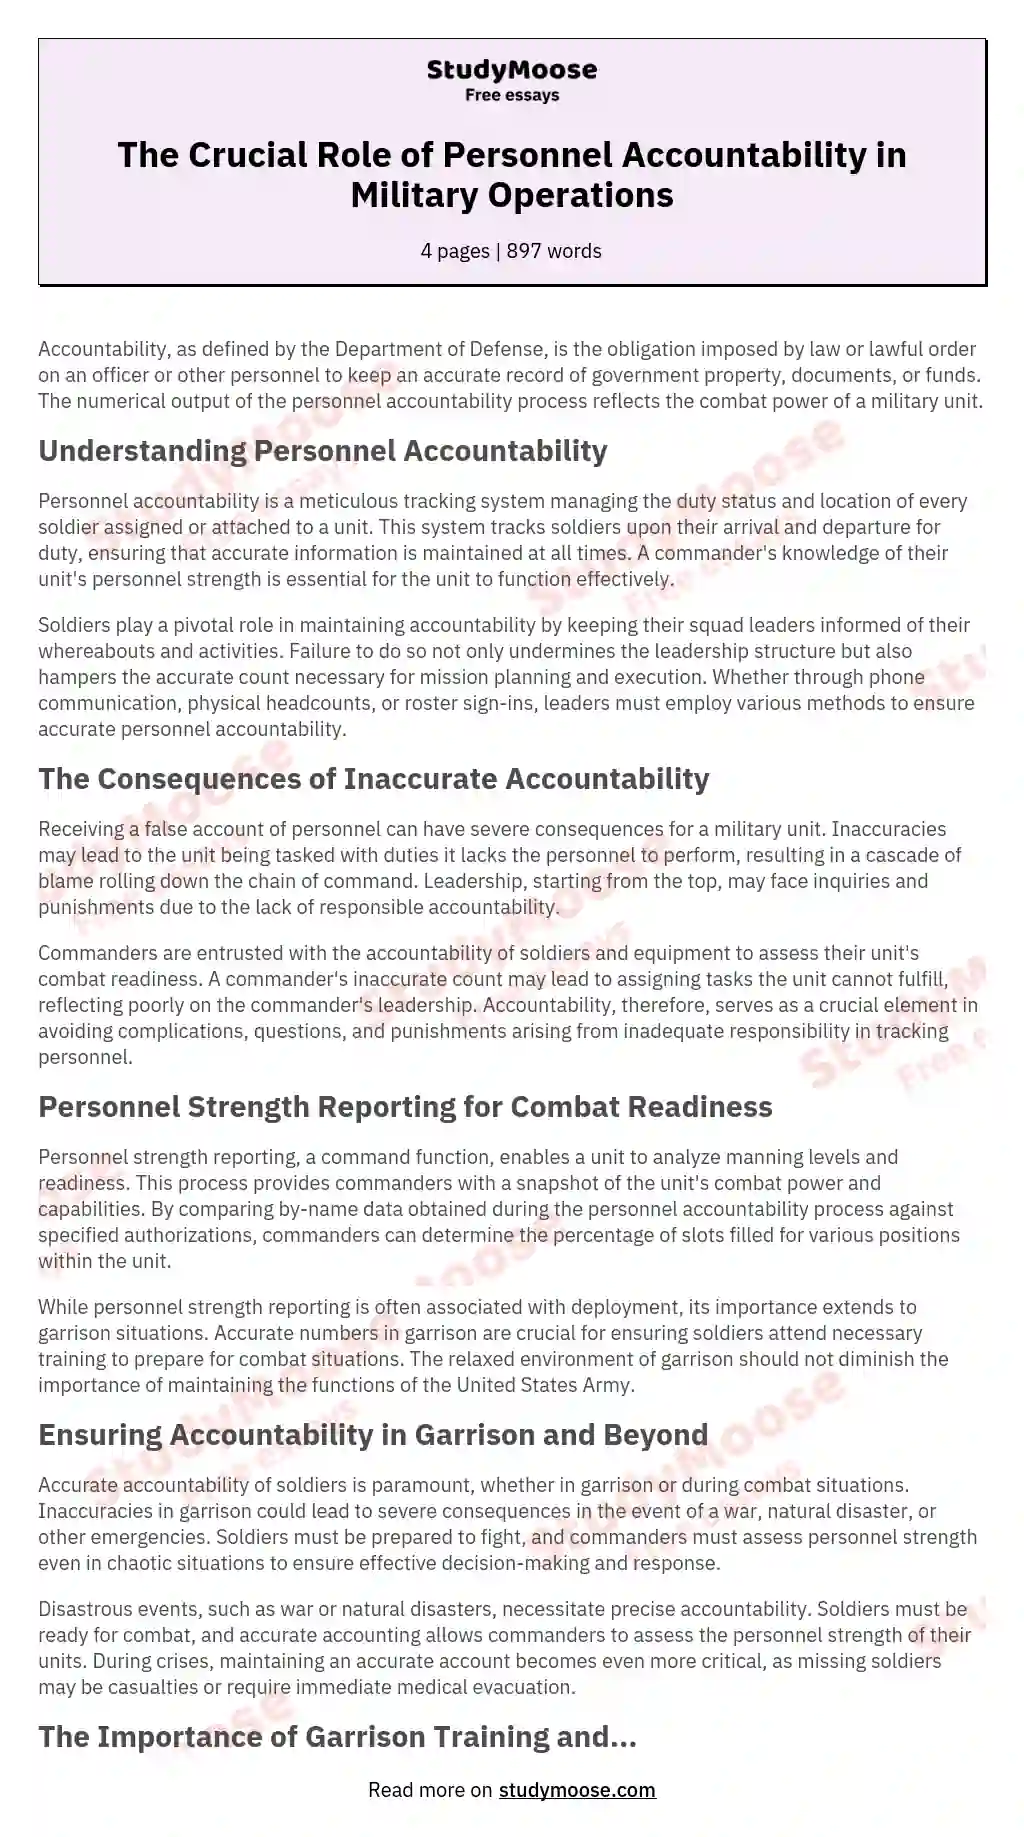 The Crucial Role of Personnel Accountability in Military Operations essay